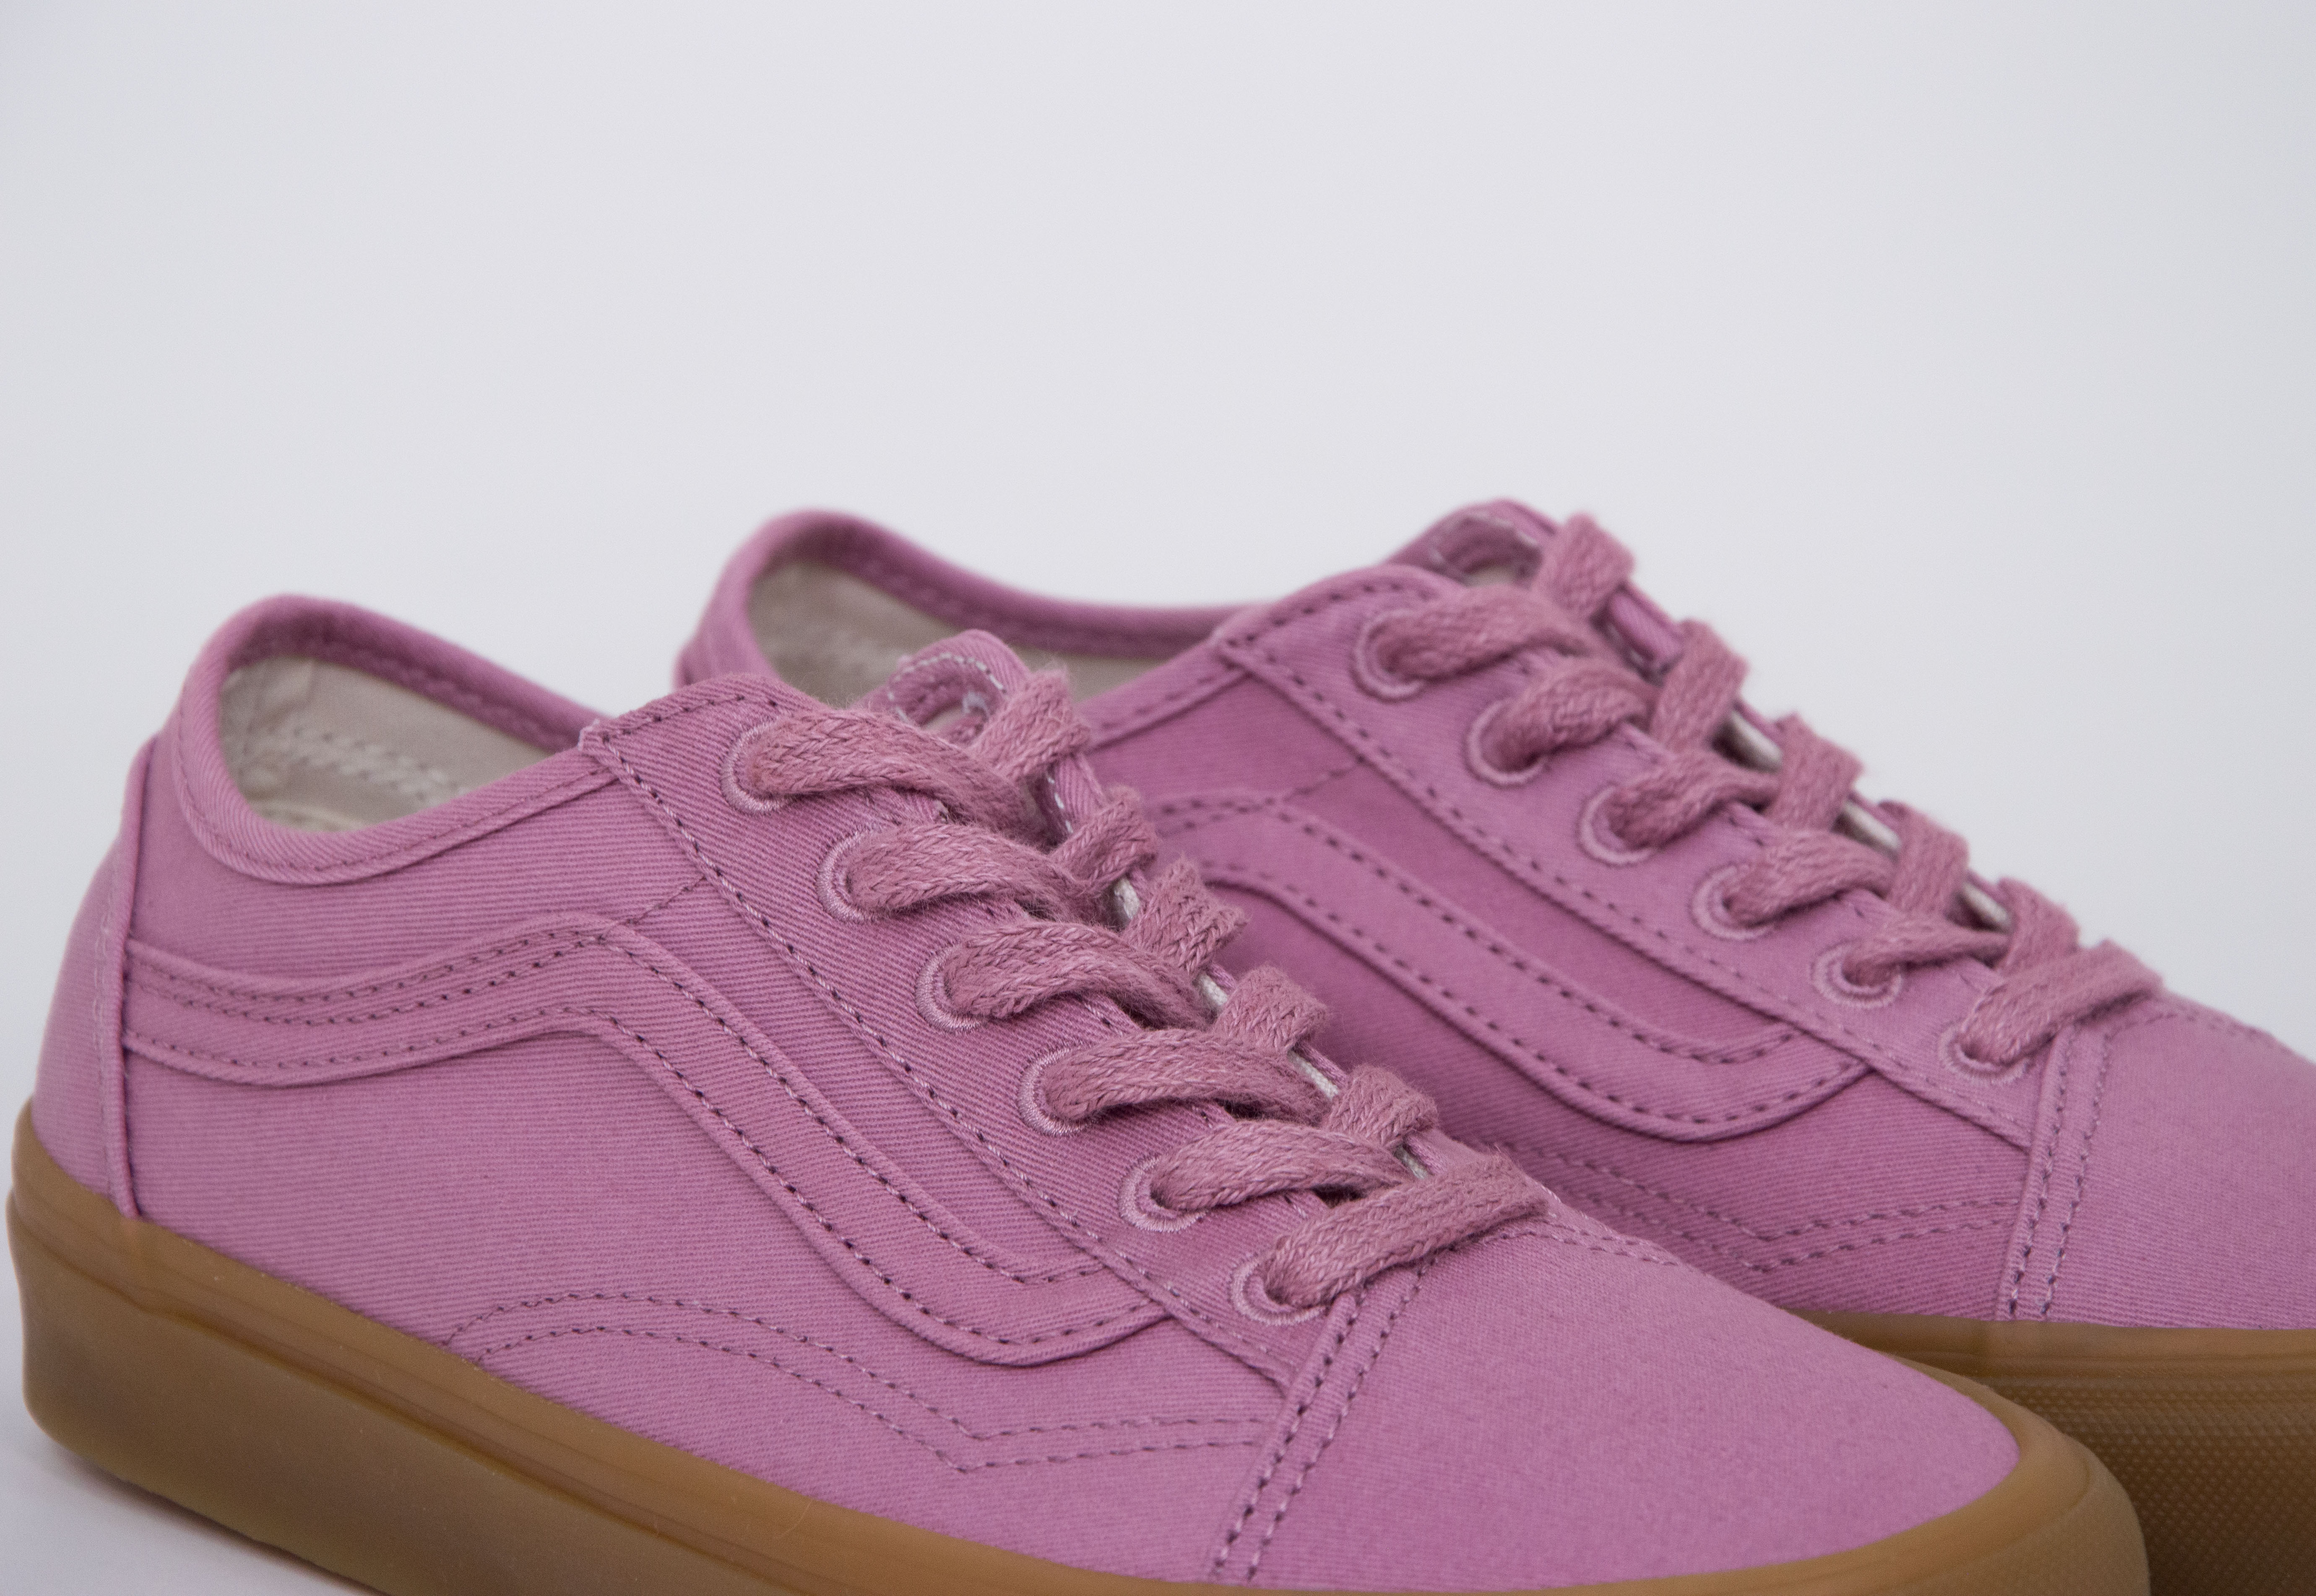 Vans - OLD SKOOL TAPERED - (Eco Theory in Our Hands) Lilas/Gum